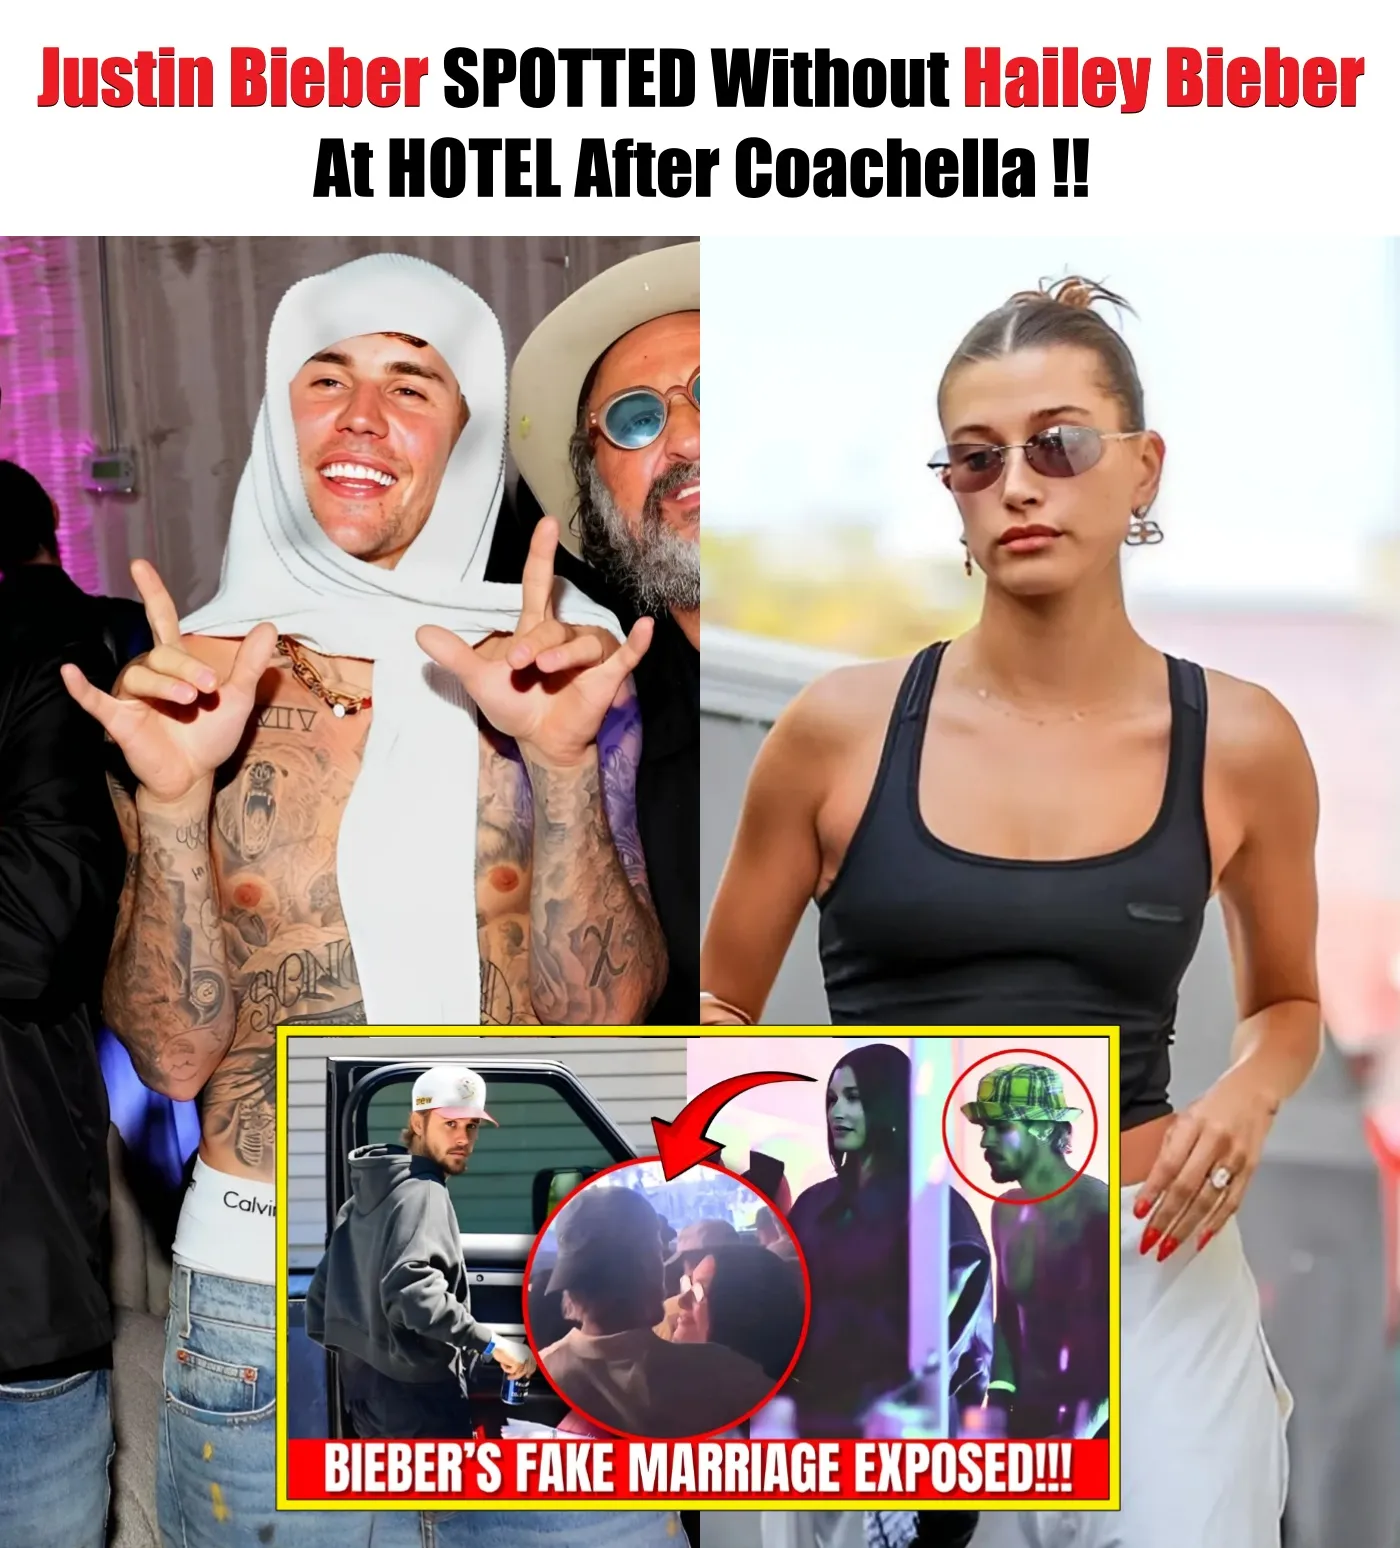 Cover Image for Justin Bieber SPOTTED Without Hailey Bieber At HOTEL After Coachella!